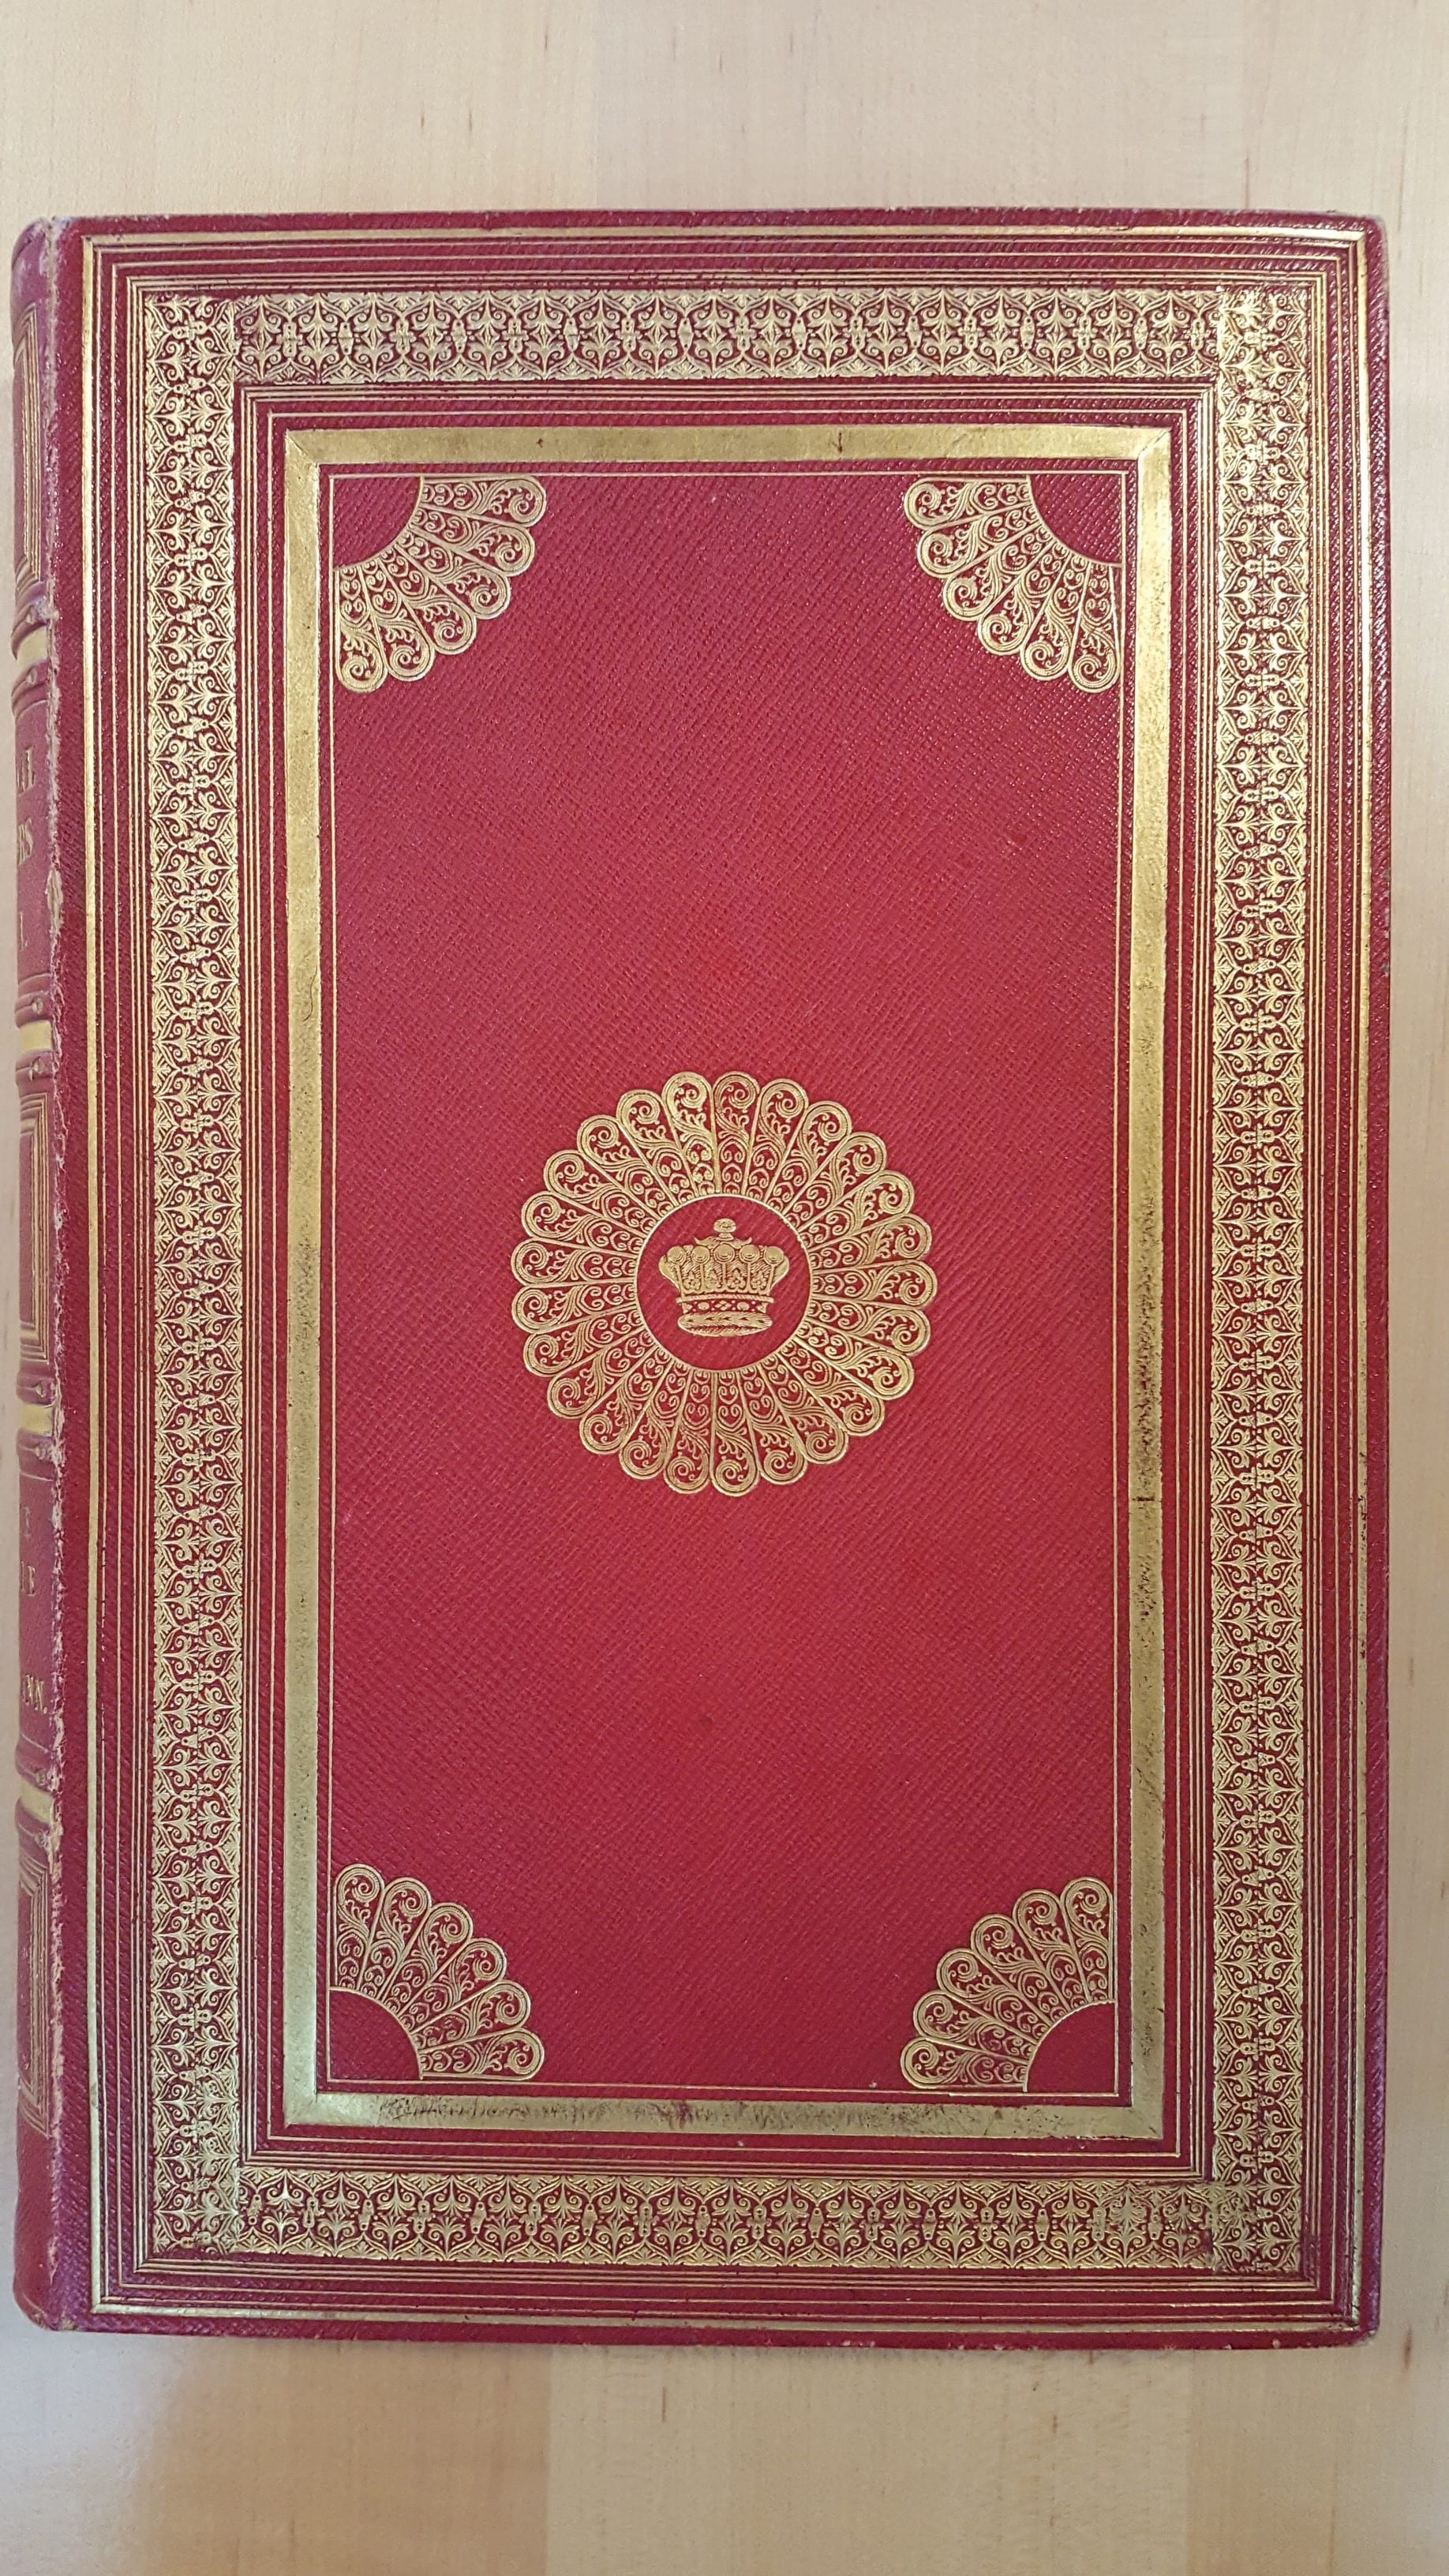 Red And Gilt Cover Of Book - Carpet , HD Wallpaper & Backgrounds